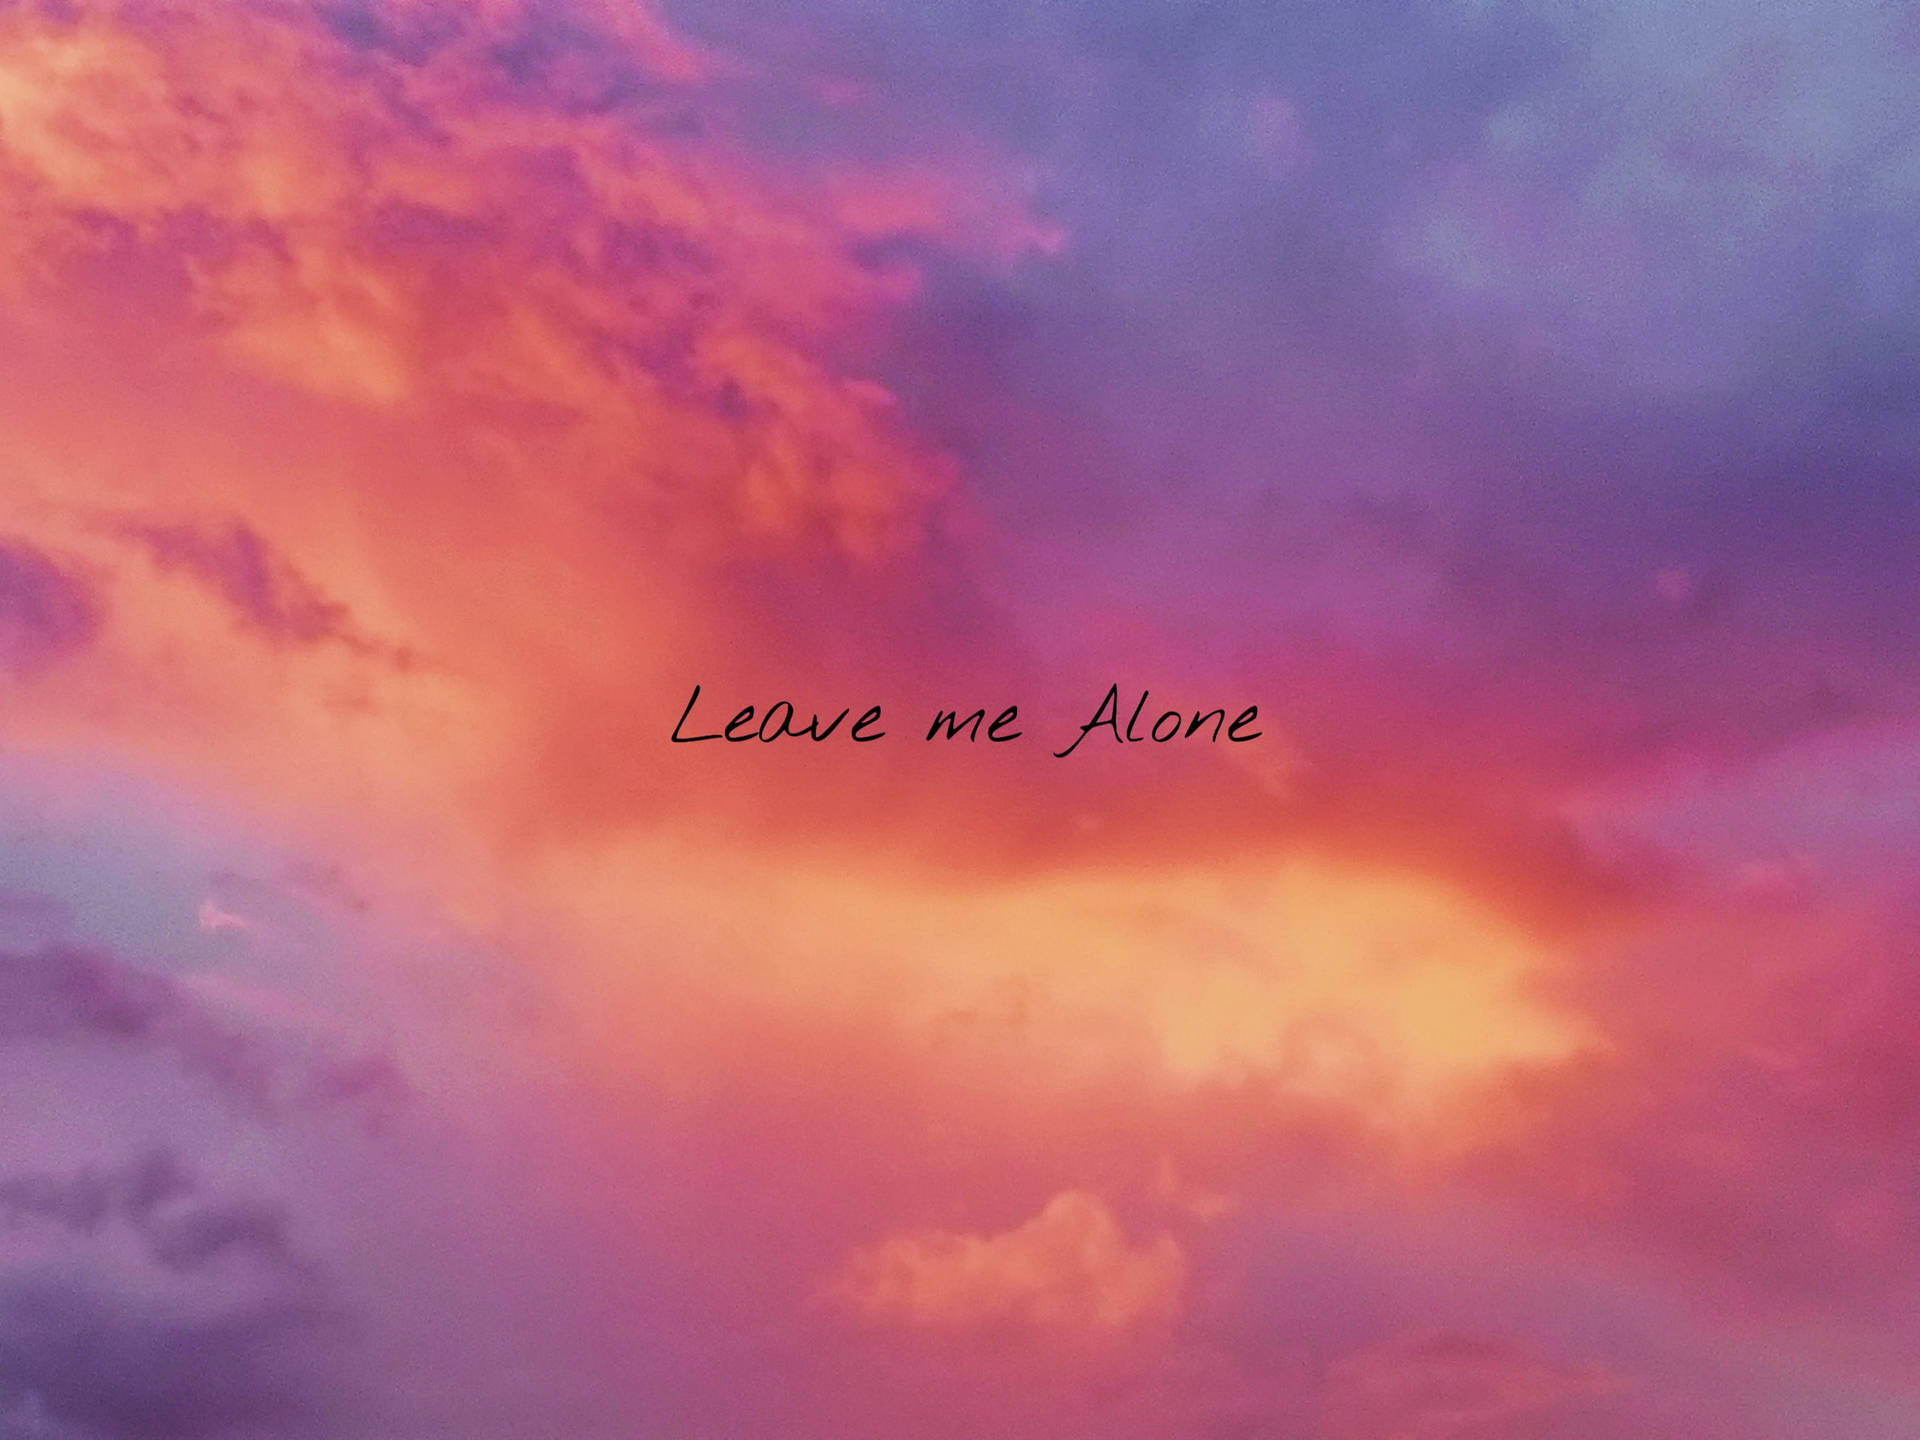 Sunset Sky With Leave Me Alone Wallpaper